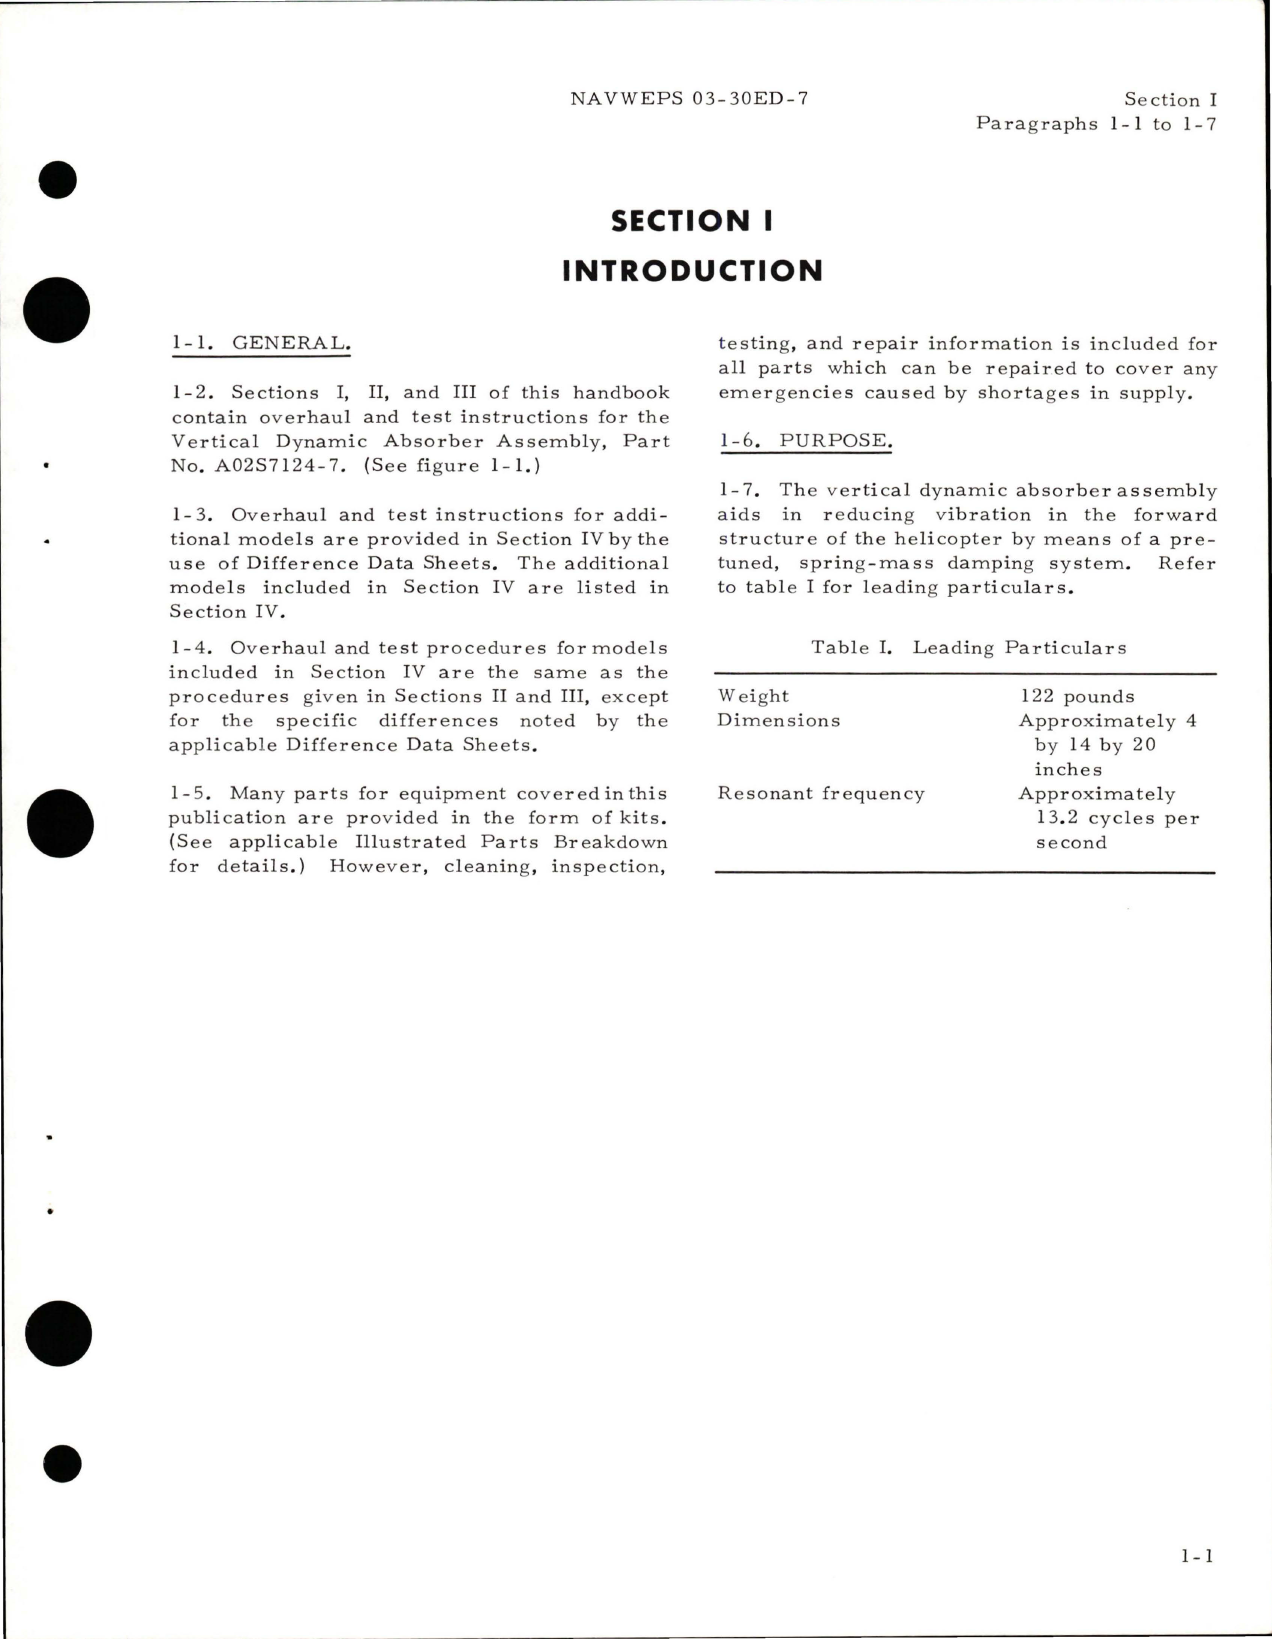 Sample page 5 from AirCorps Library document: Overhaul Instructions for Vertical Dynamic Absorber Assembly - Part A02S7124-7, A02S7124-9